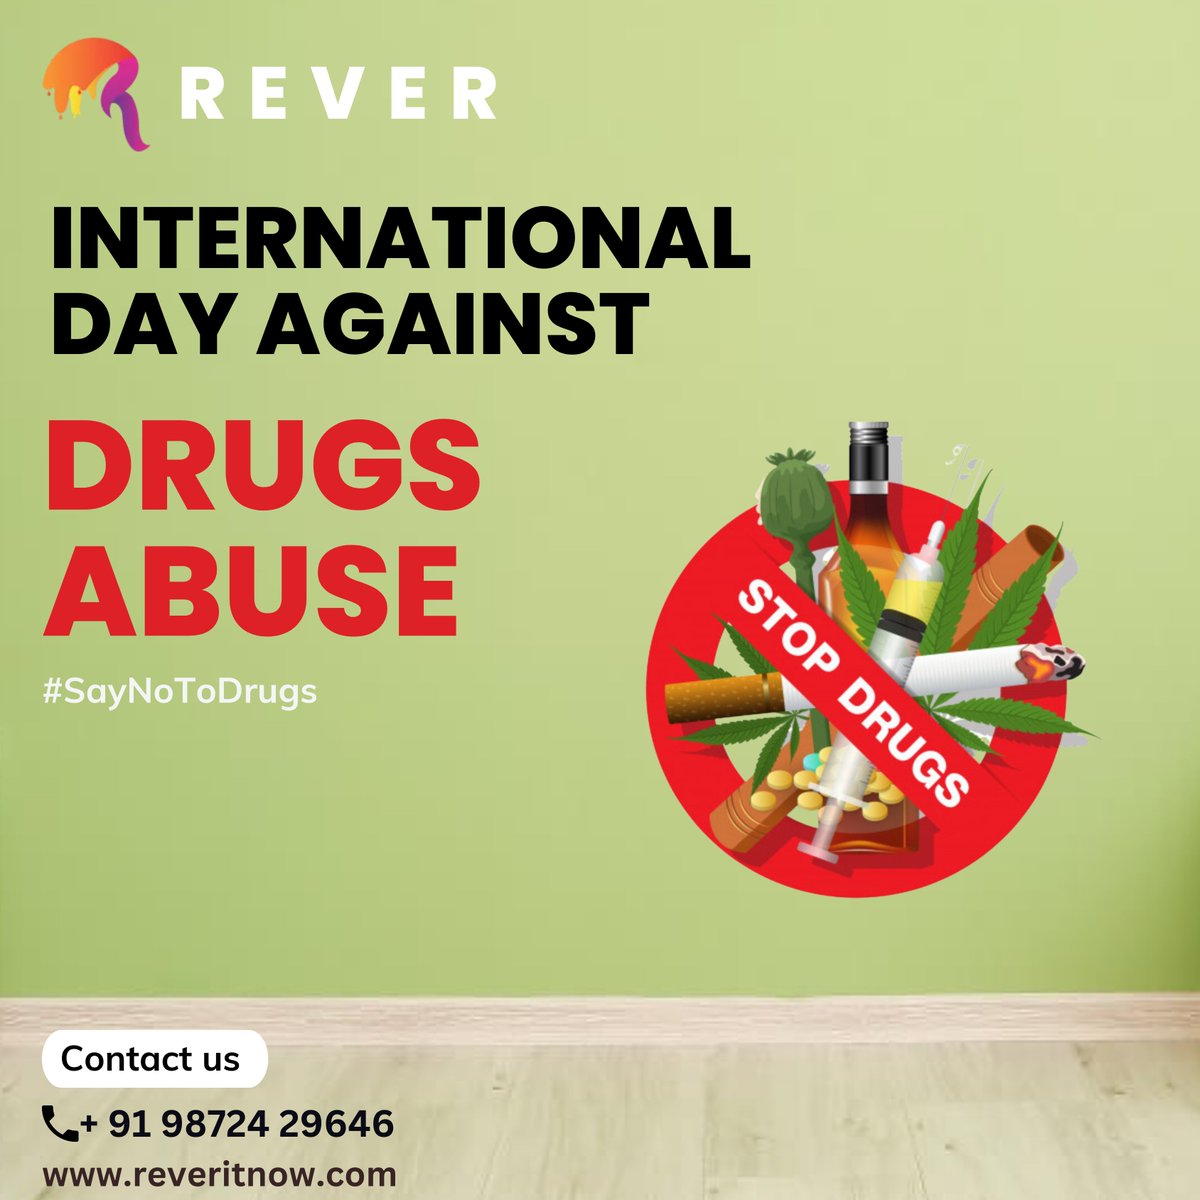 'Educate, Prevent, and Rehabilitate: End the Cycle of Drug Abuse!'

#DrugFreeWorld #SayNoToDrugs #DrugAbuseAwareness #DrugPrevention #HealthyChoices #RecoveryMatters #NoToSubstanceAbuse #BreakTheCycle
#ChooseLife #DrugFreeGeneration
#YouthAgainstDrugs